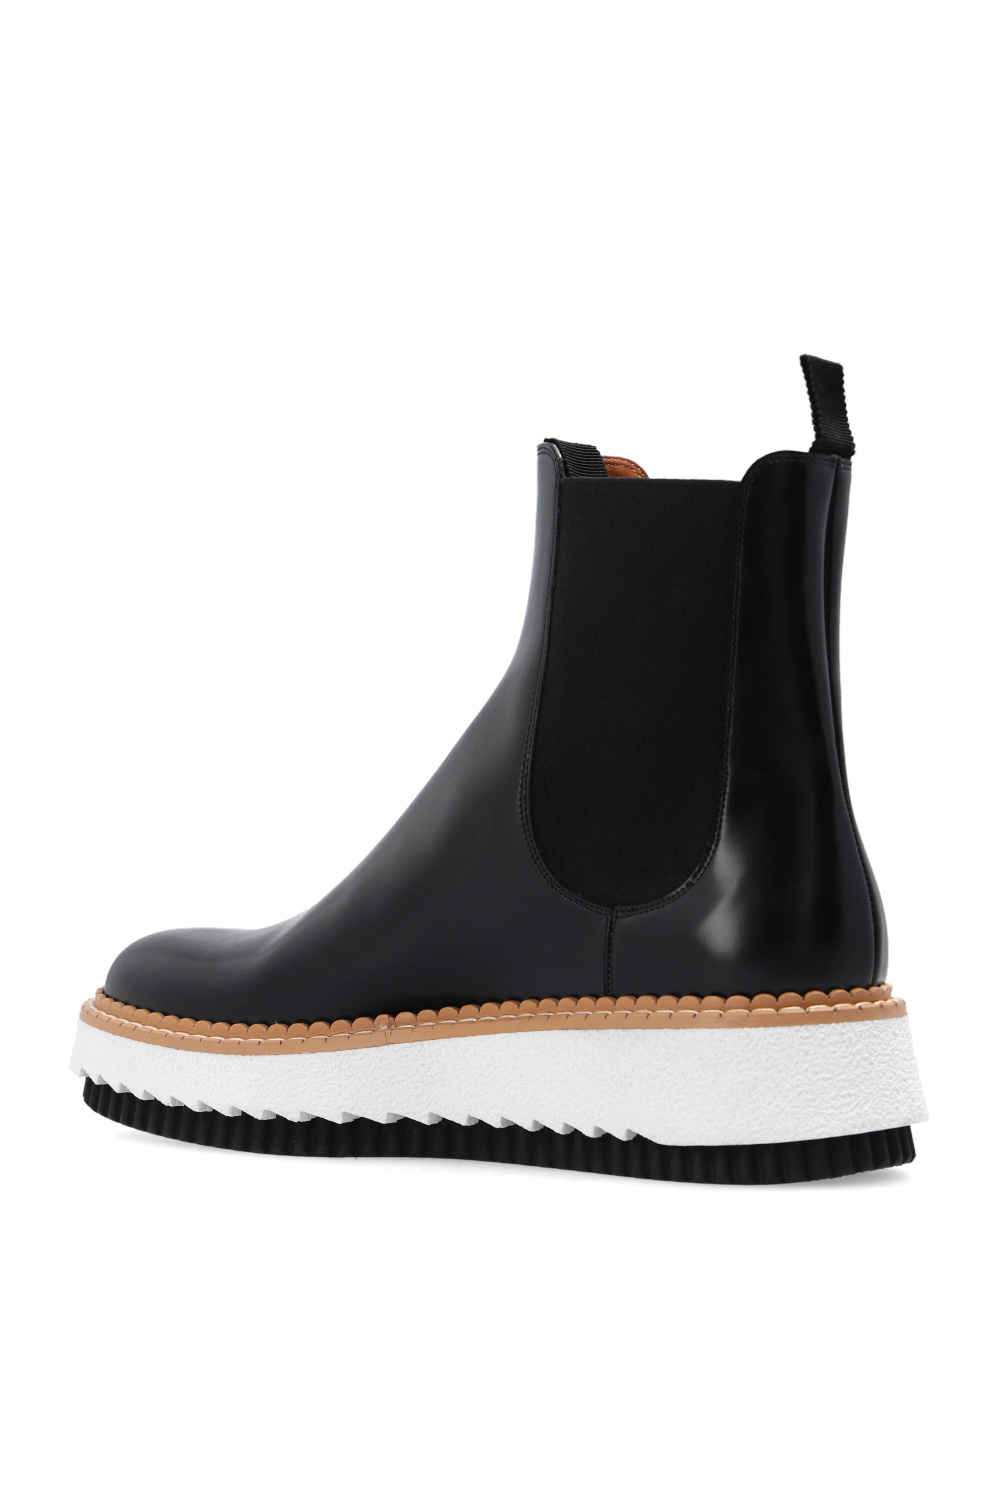 Chloé ‘Chelsea’ leather ankle boots